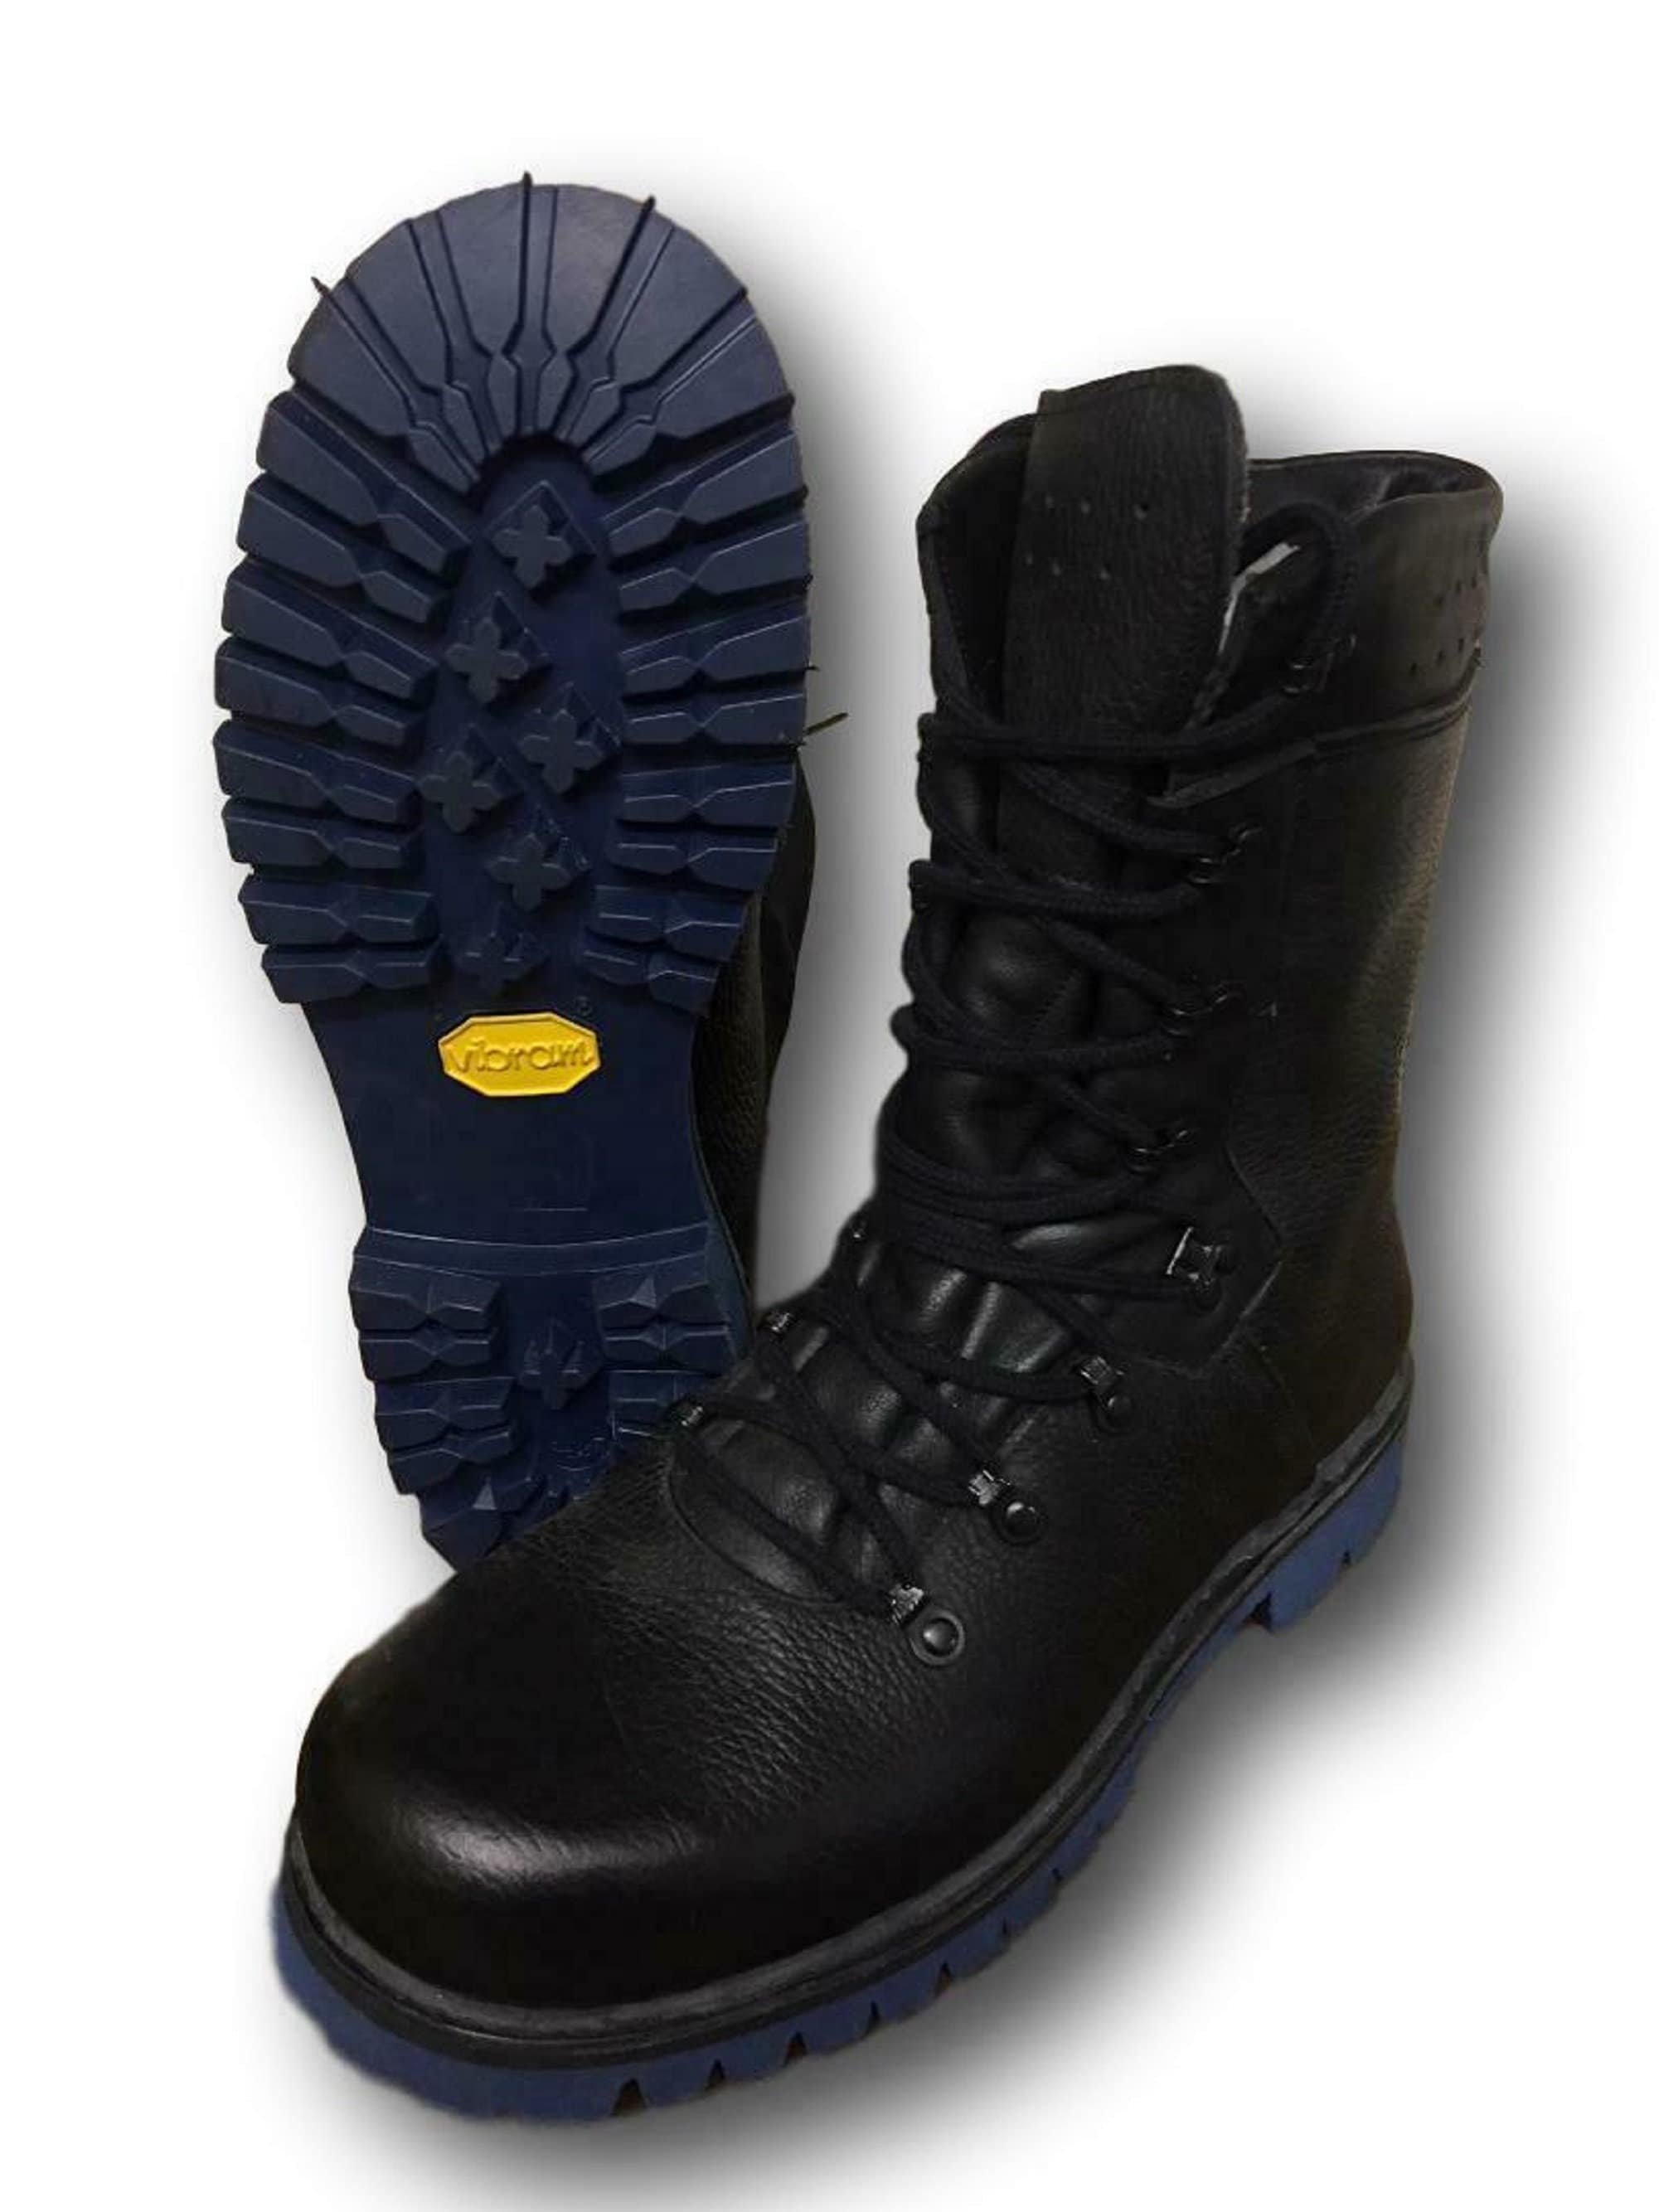 German Paraboots With New Blue Vibram Soles -